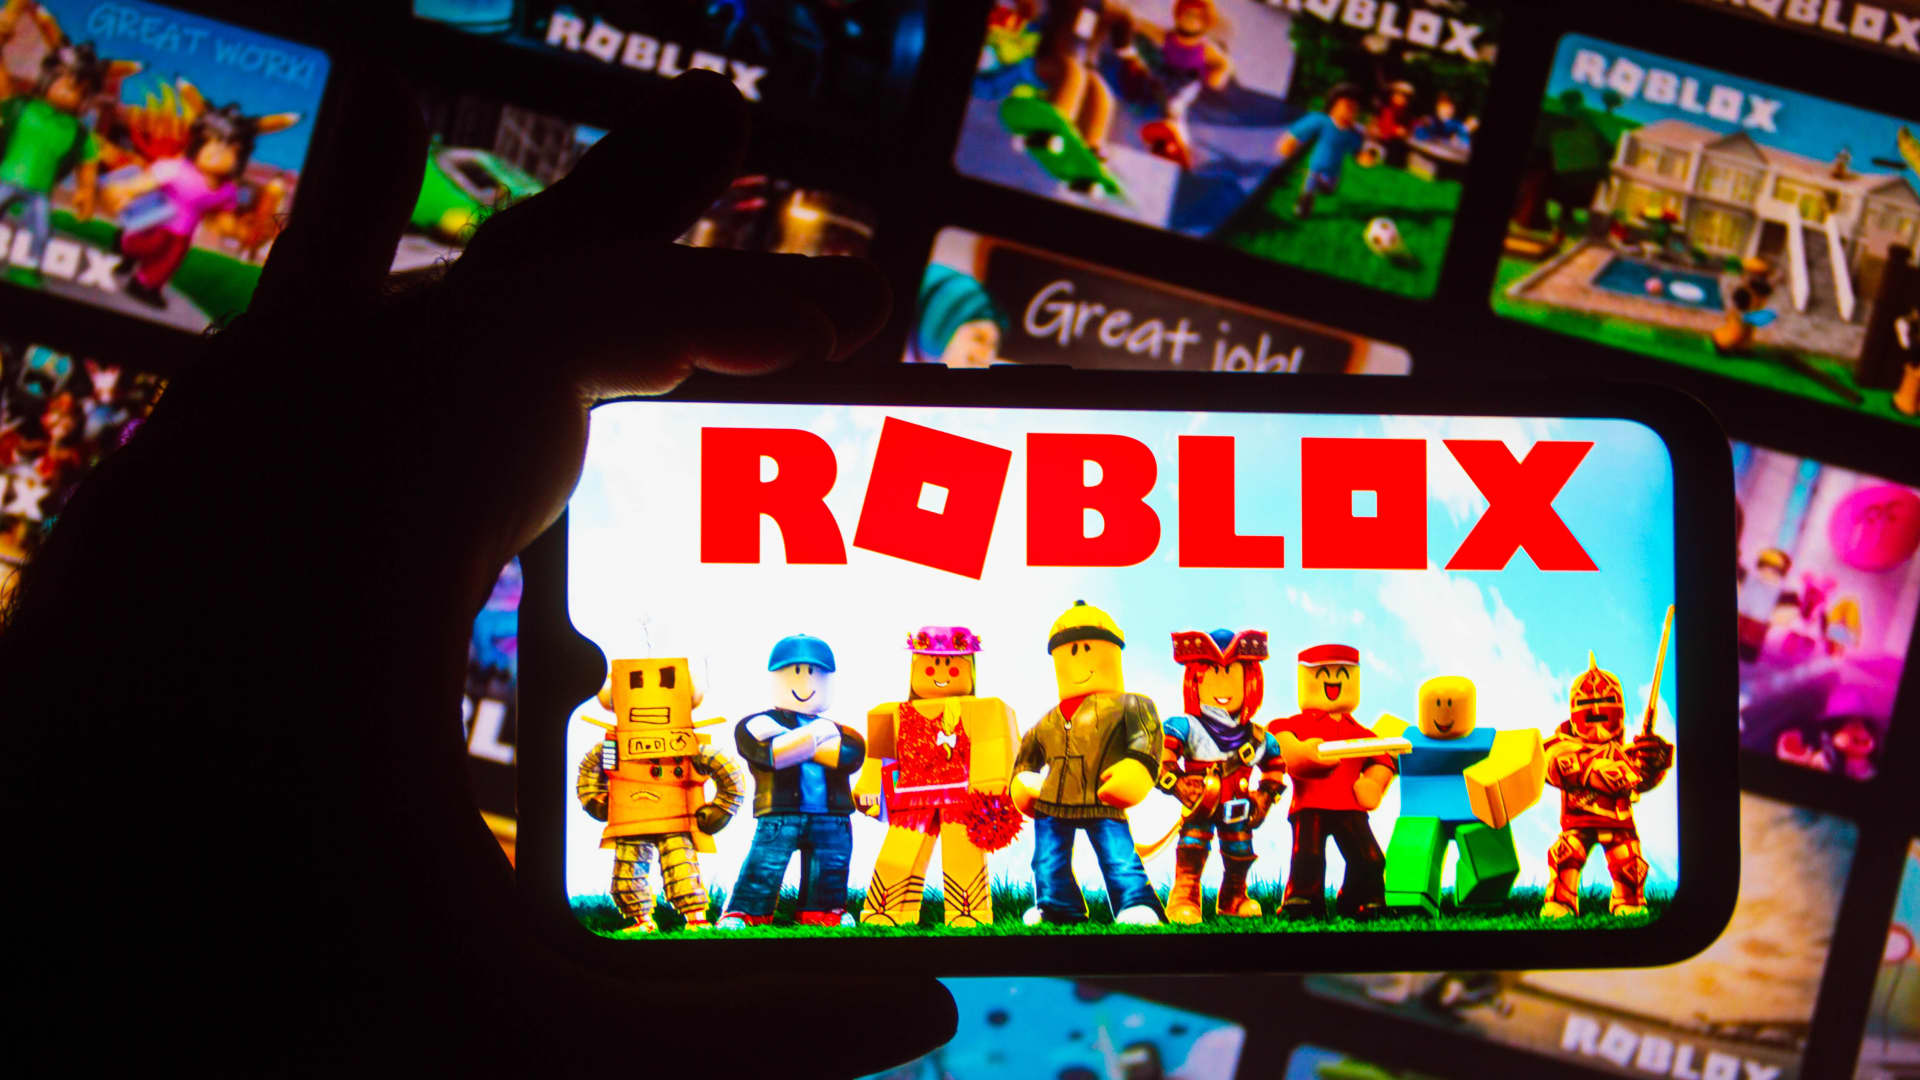 Jefferies says RBLX is a top internet stock, upgrades to buy